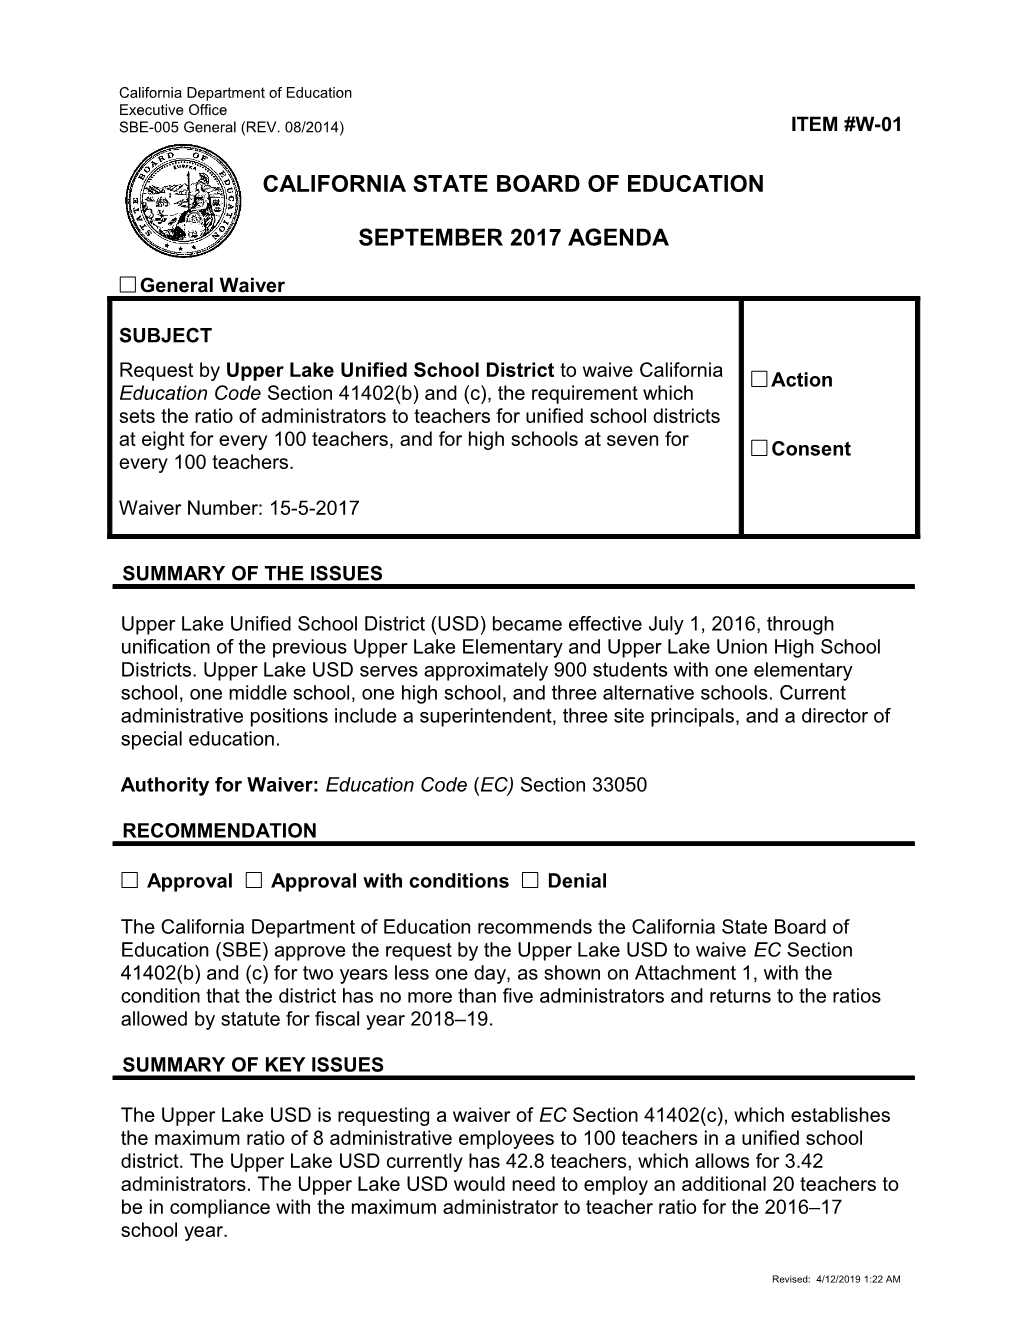 September 2017 Waiver Item W-01 - Meeting Agendas (CA State Board of Education)